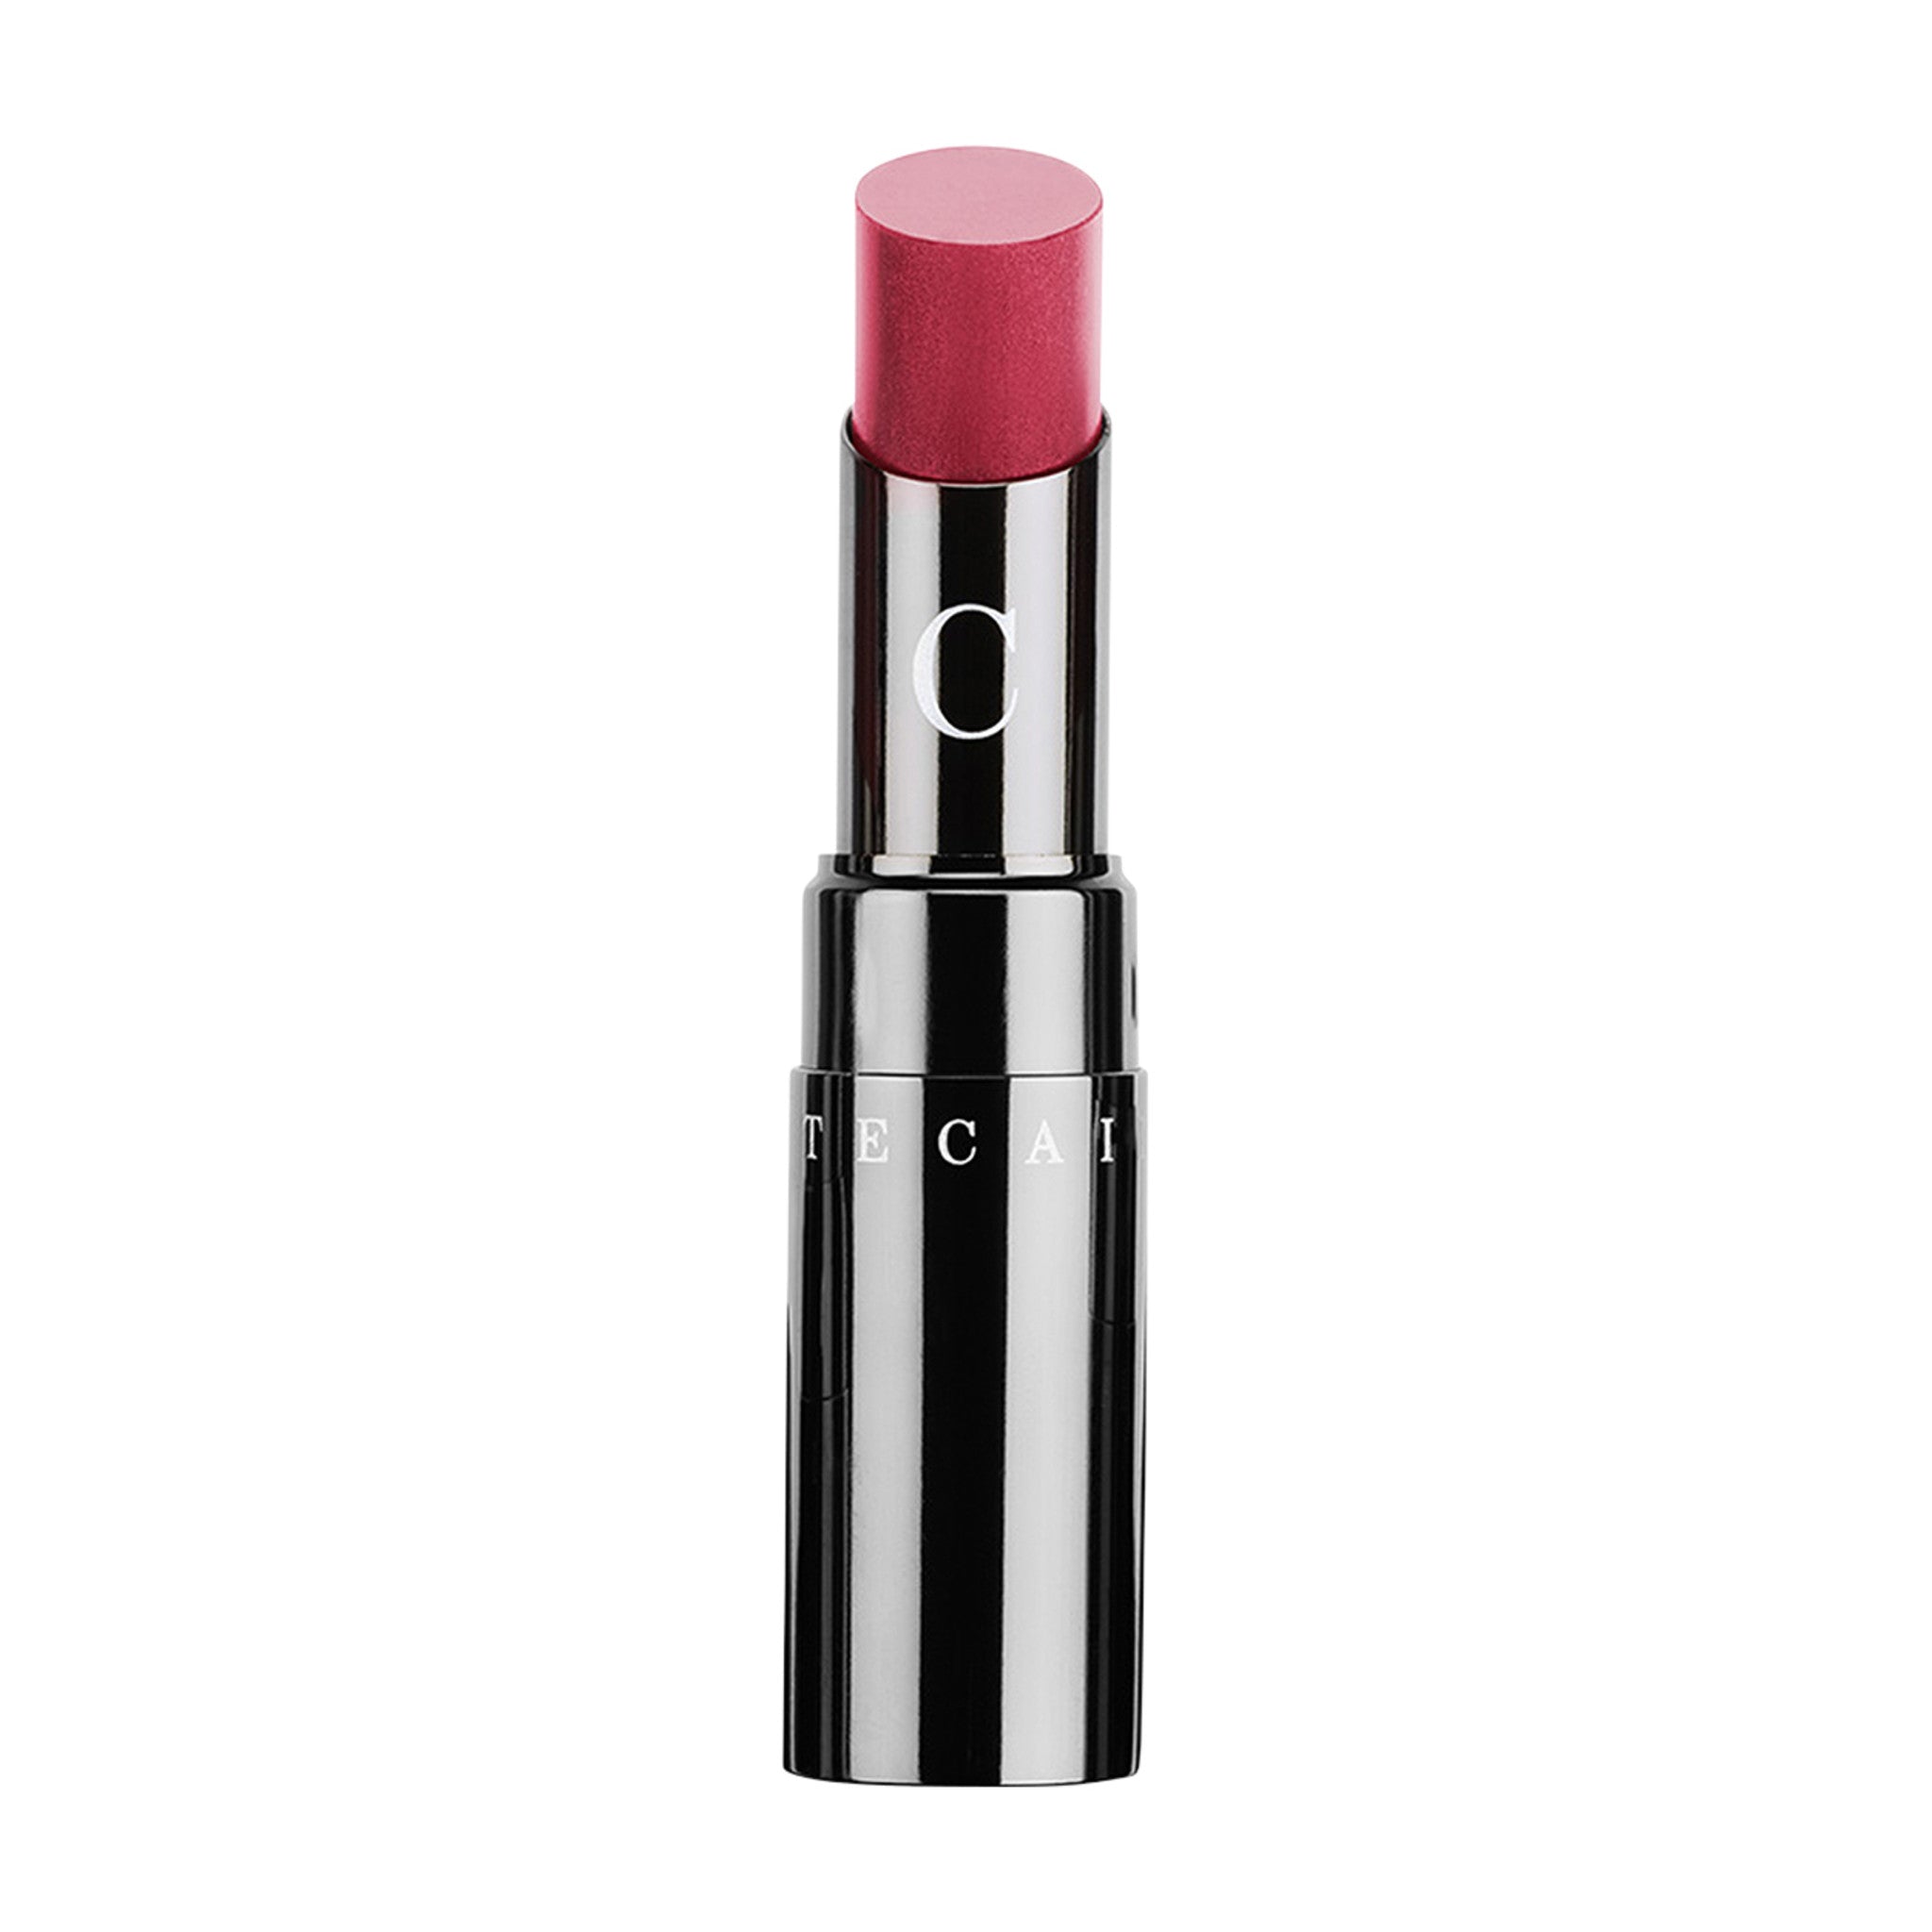 Chantecaille Lip Chic Lipstick Color/Shade variant: Amaryllis main image. This product is in the color pink